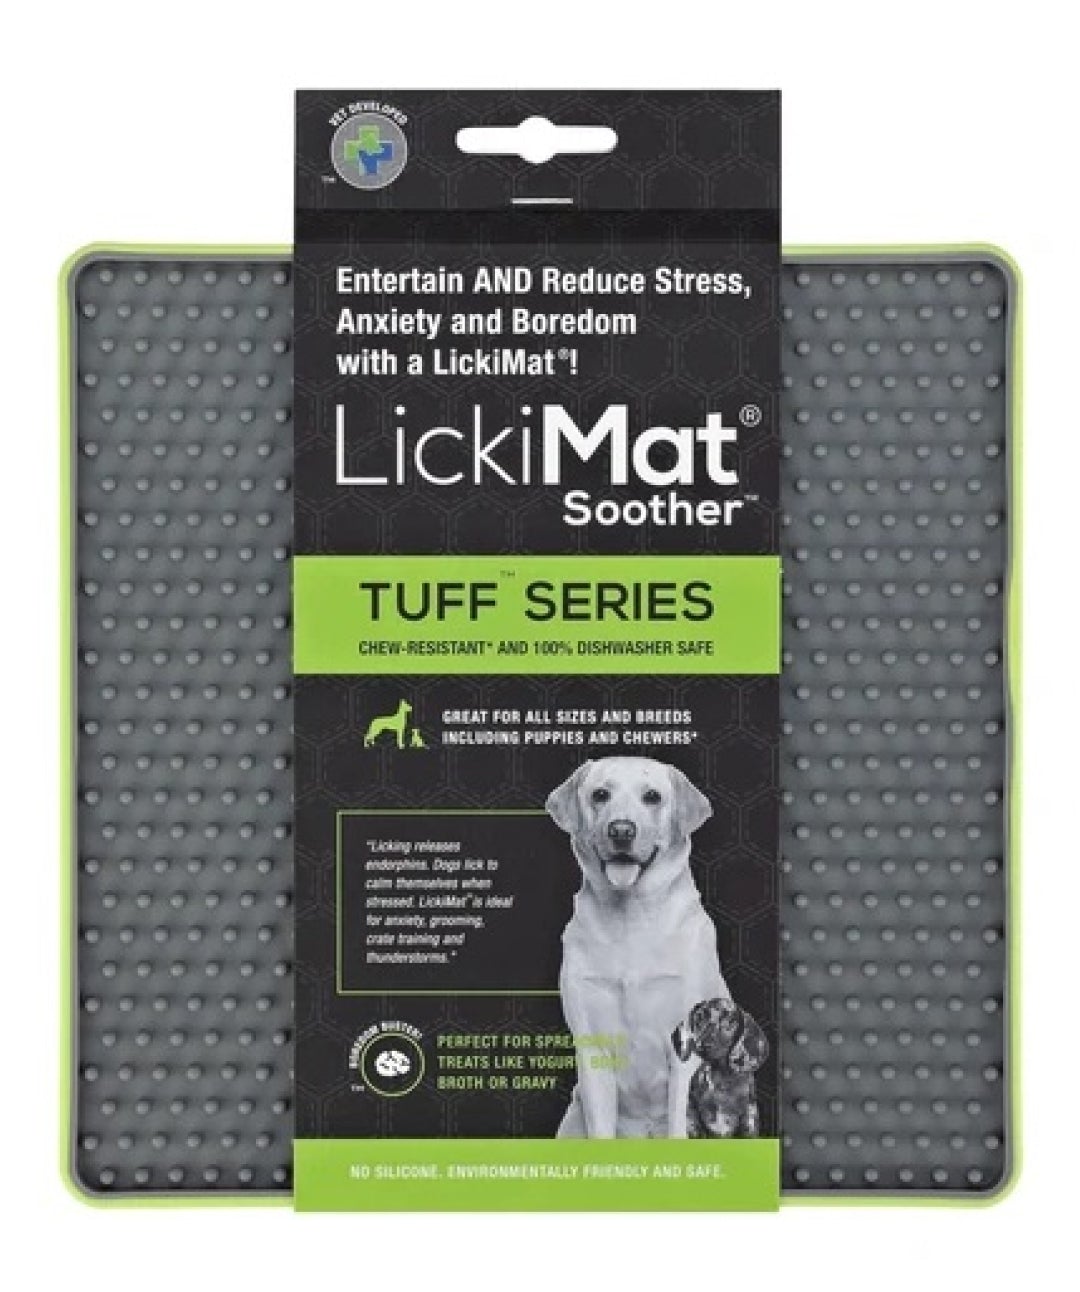 LickiMat Tuff Soother Green